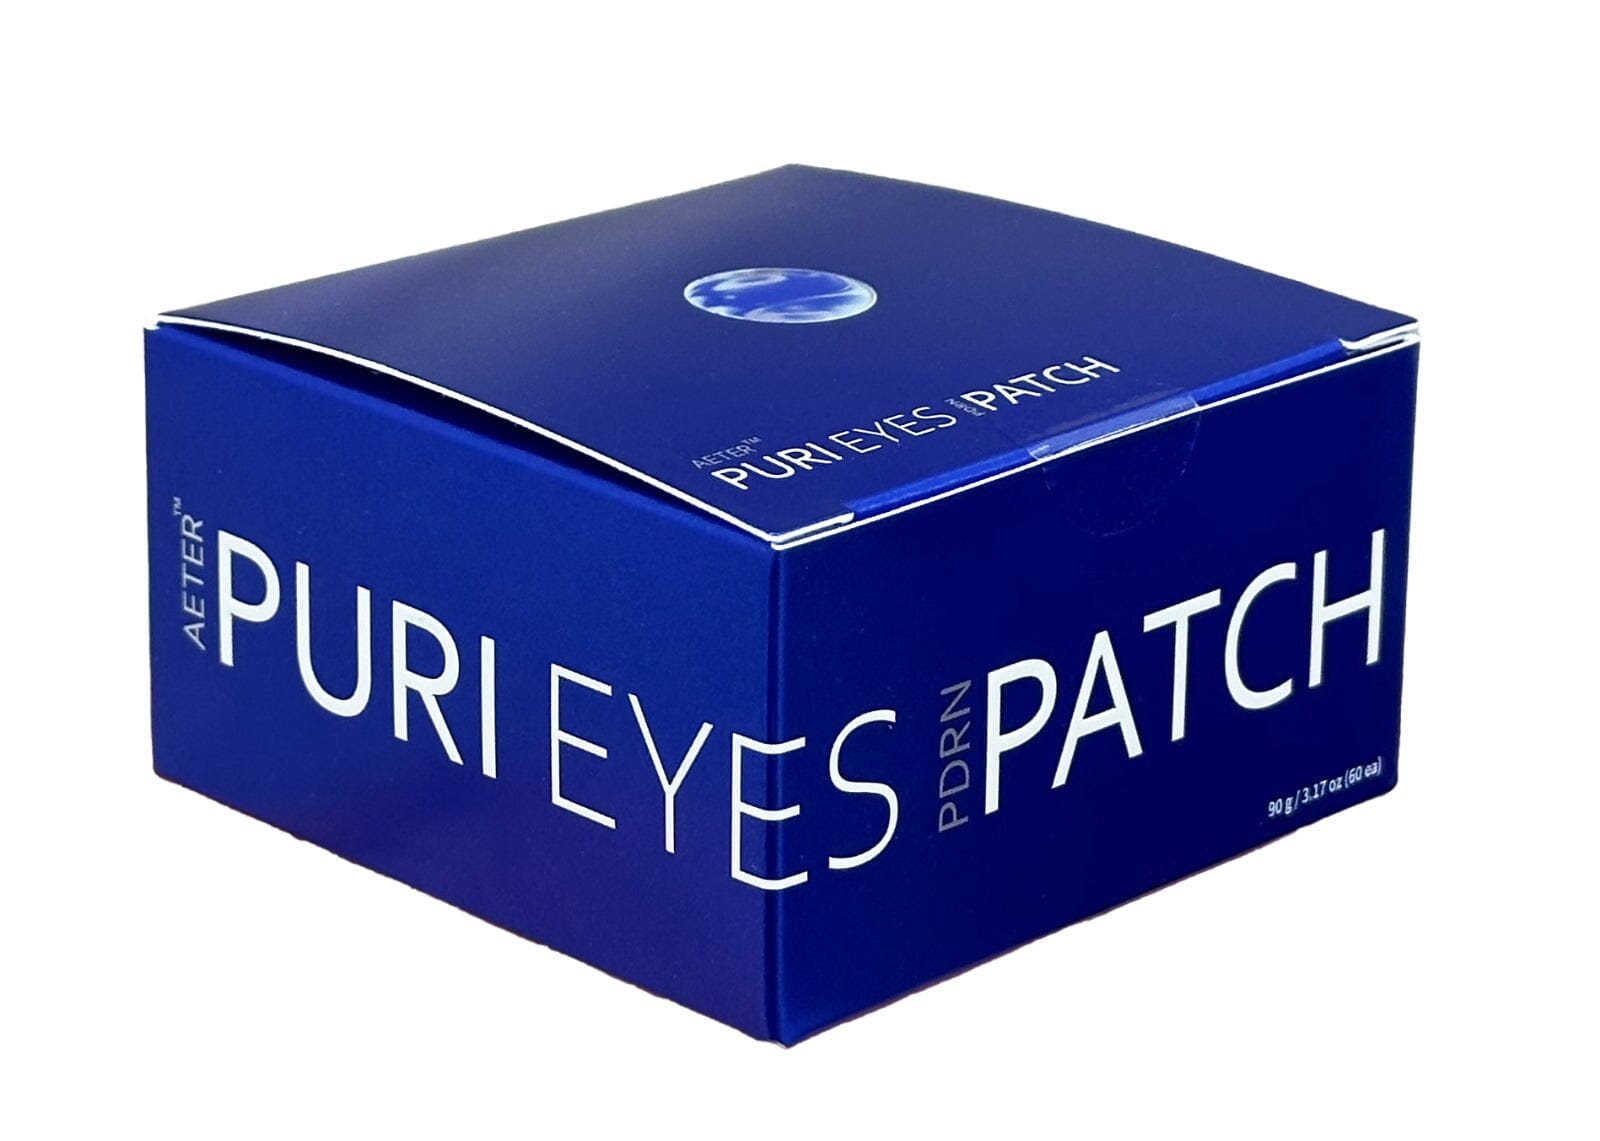 AETER PURI EYES PDRN PATCHES